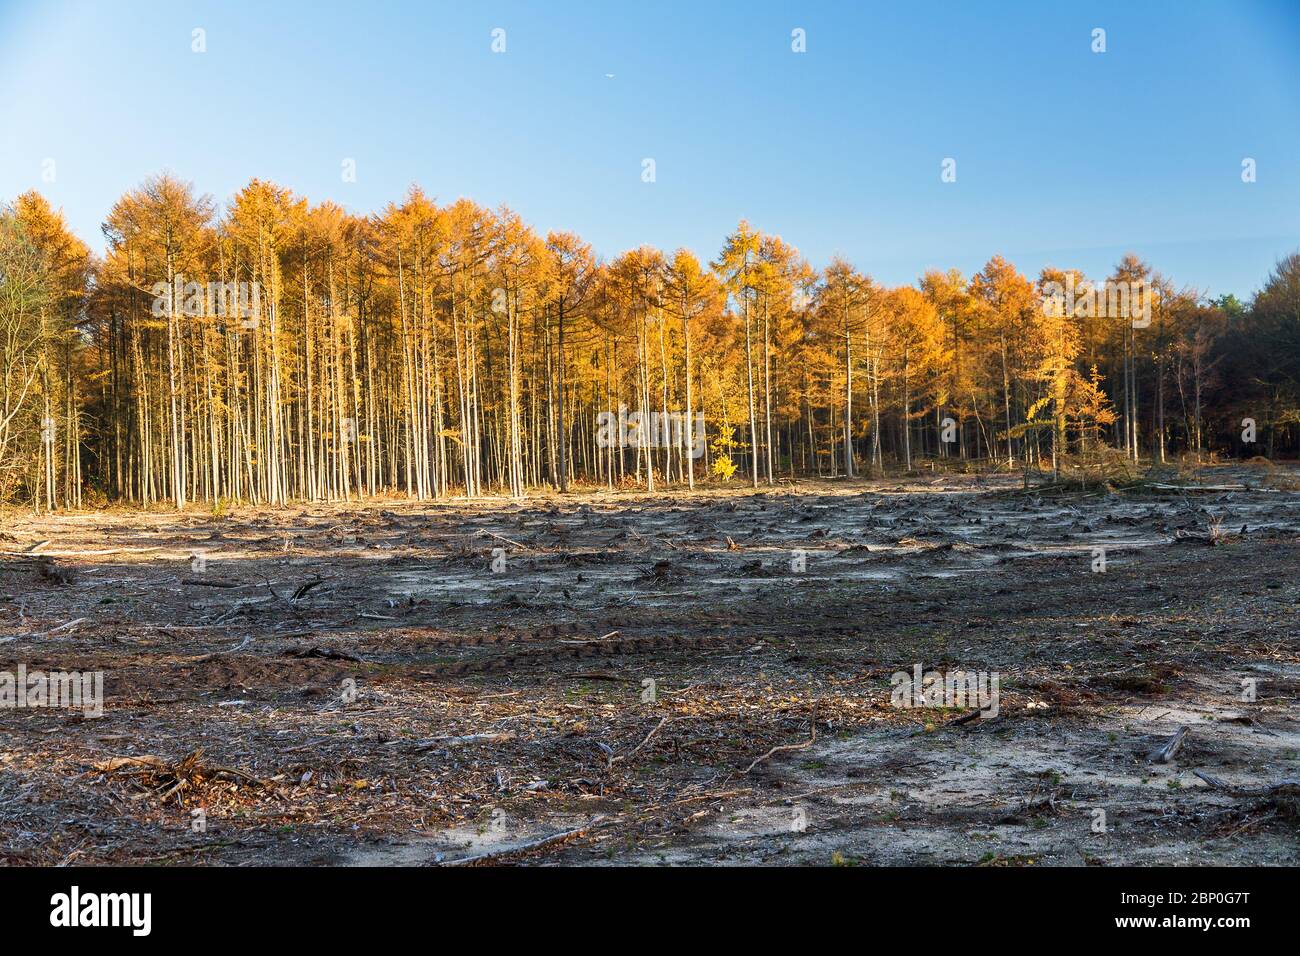 Deforestation in the Spanderswoud forest in the Netherlands Stock Photo